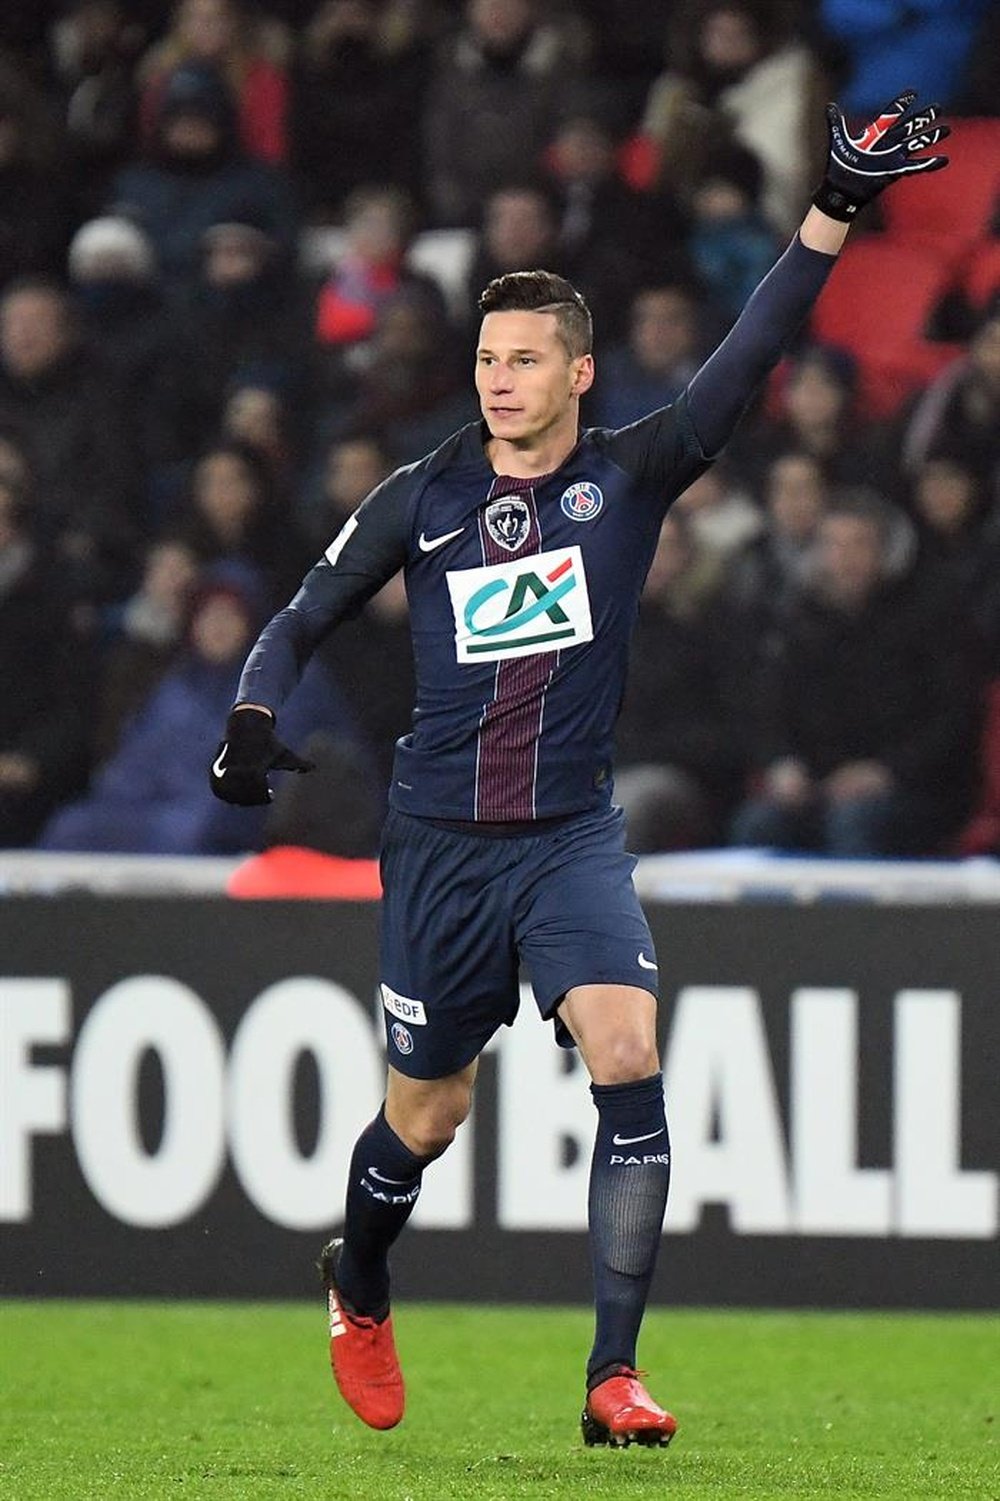 Julian Draxler standing on the pitch. EFE